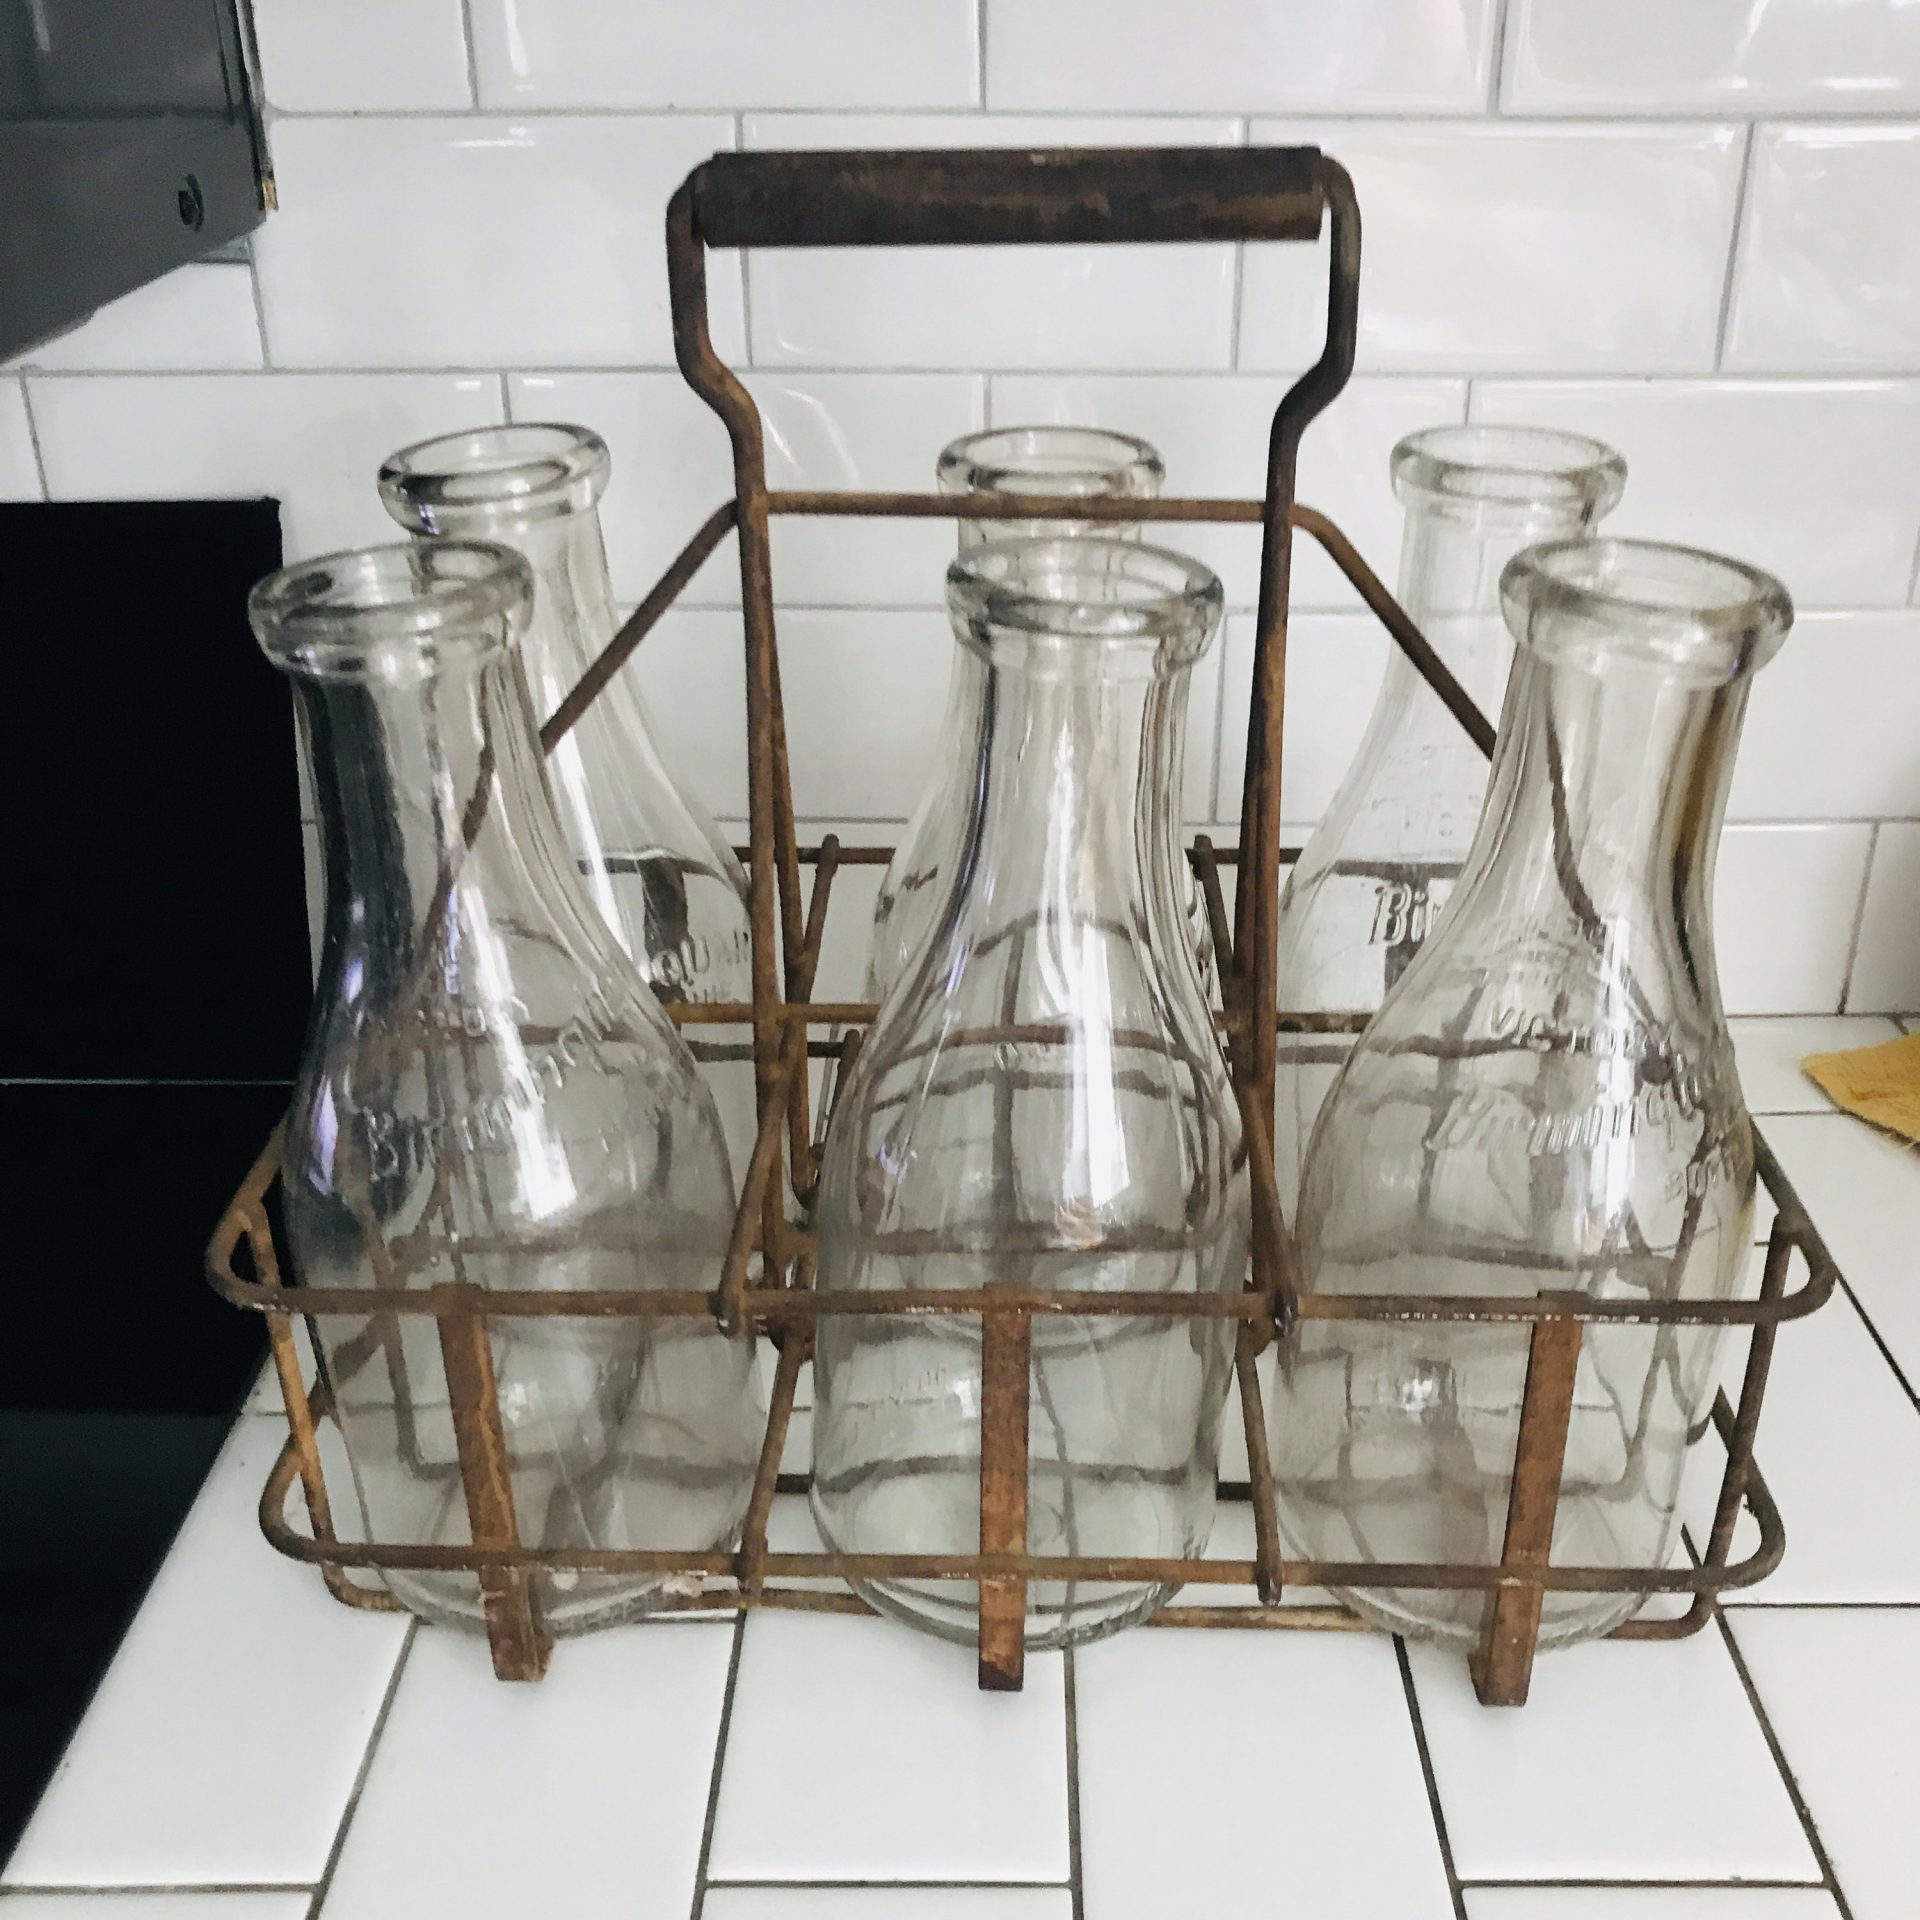 6 Glass Milk Bottles in Metal Carrier - Wholesale Flowers and Supplies